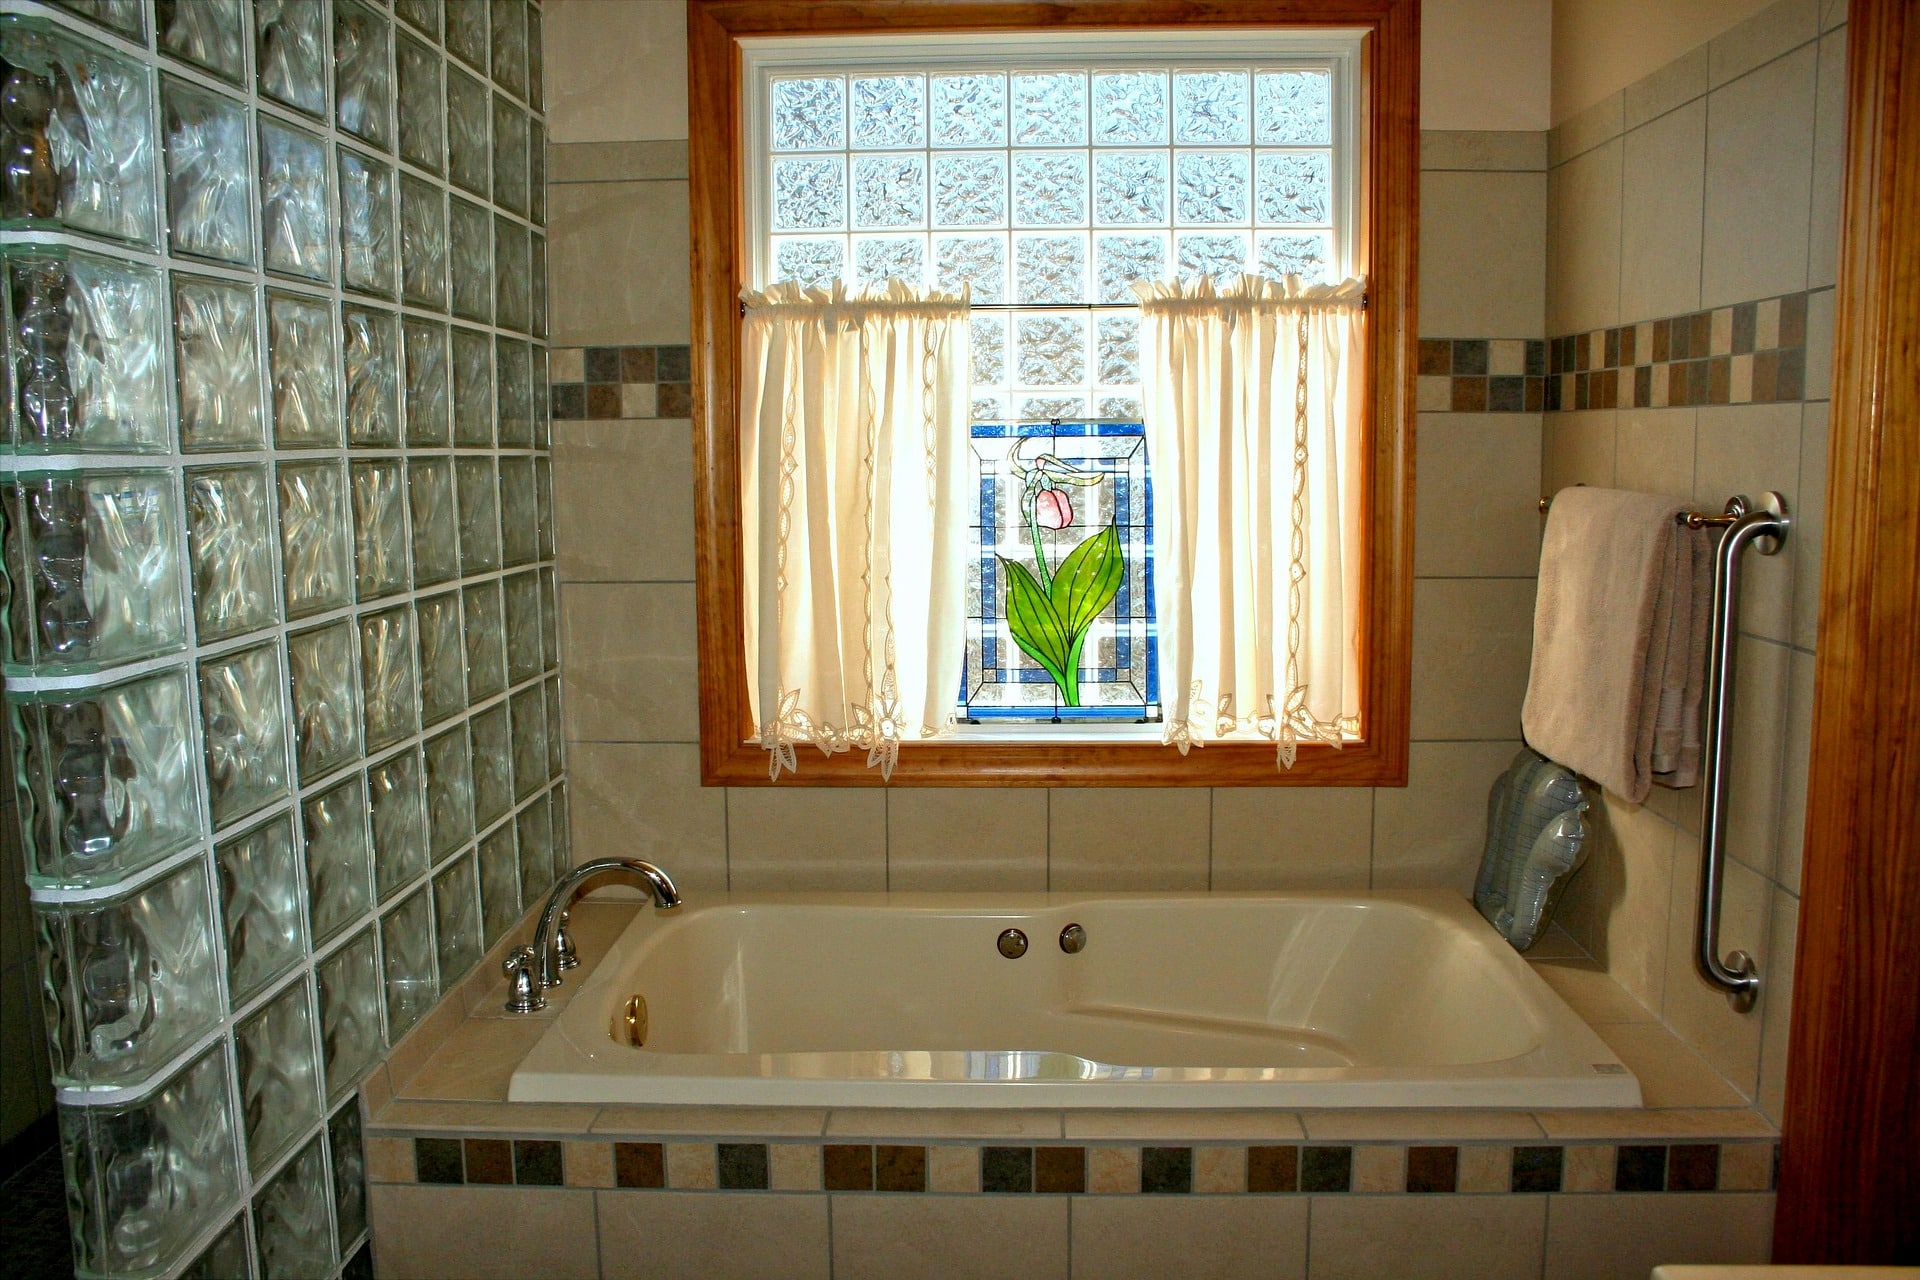 Slip Resistant Surface Tub Tile, Can A Bathtub Be Resurfaced Twice